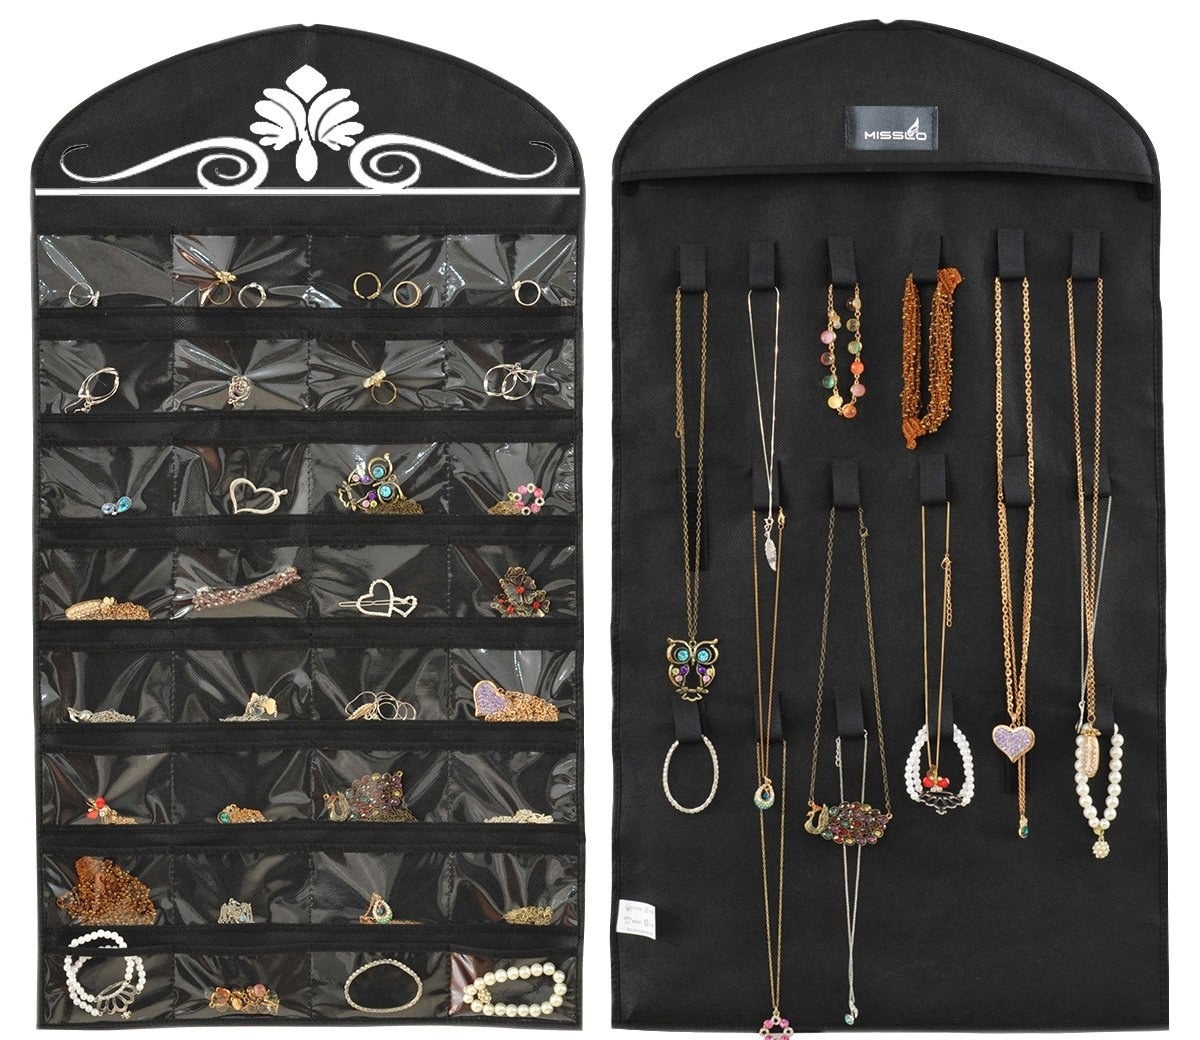 the black organizer holding various piece of jewelry